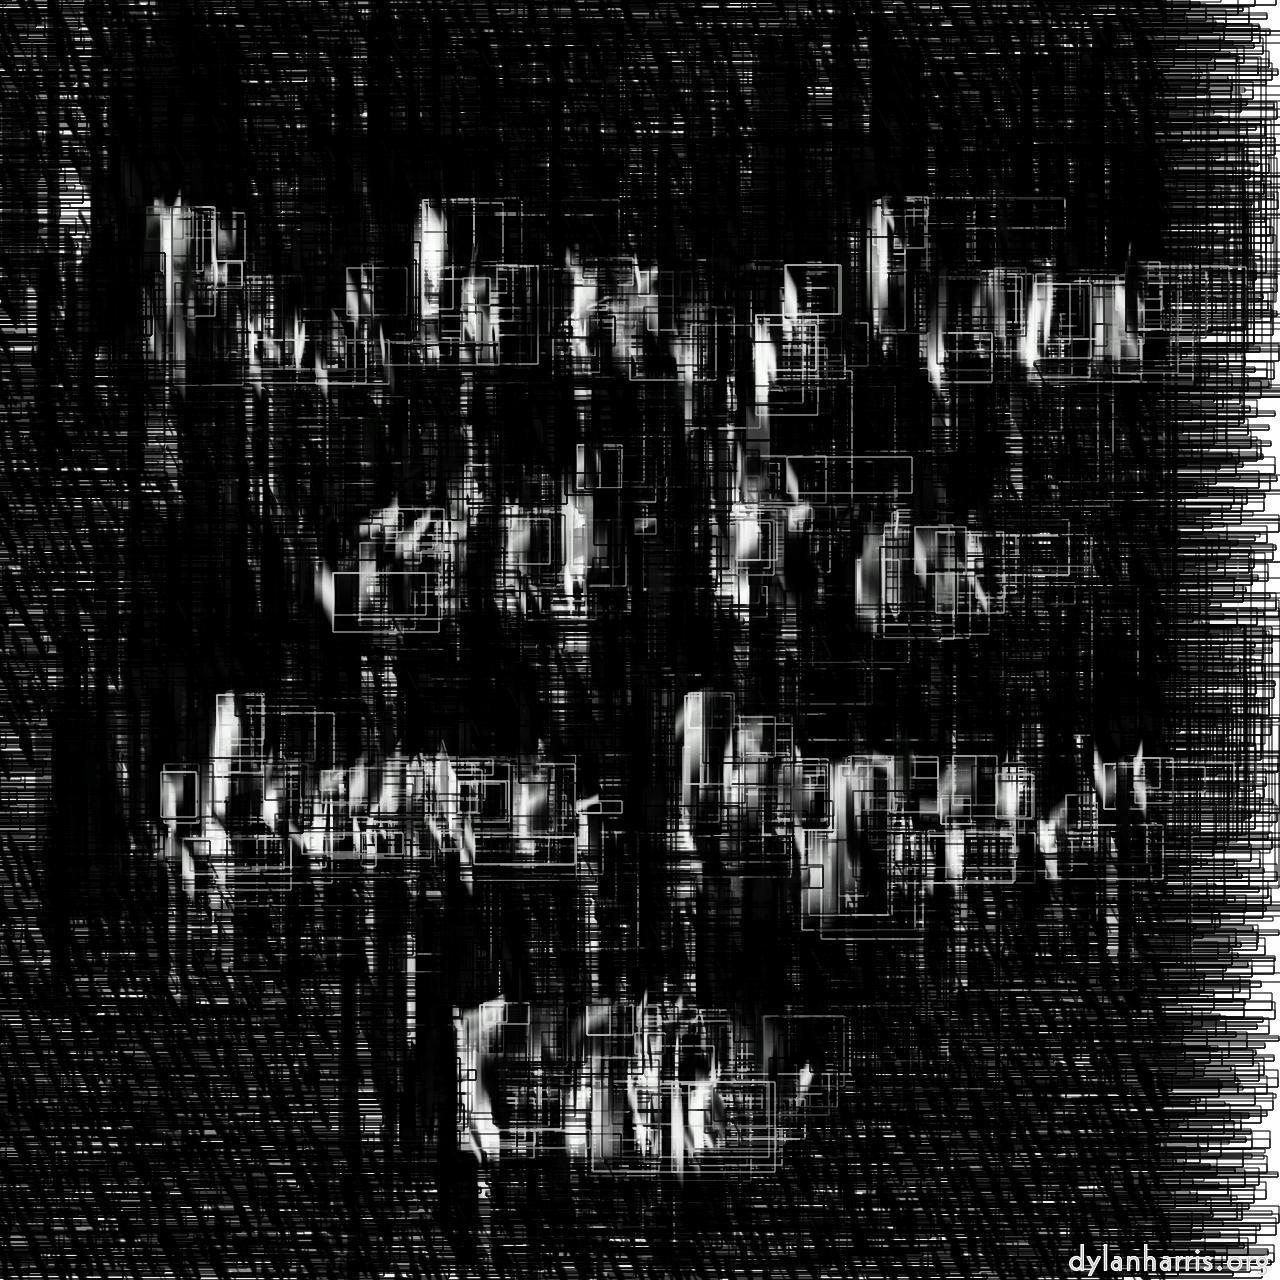 image: non-rep generative and abstract :: hv rectangular